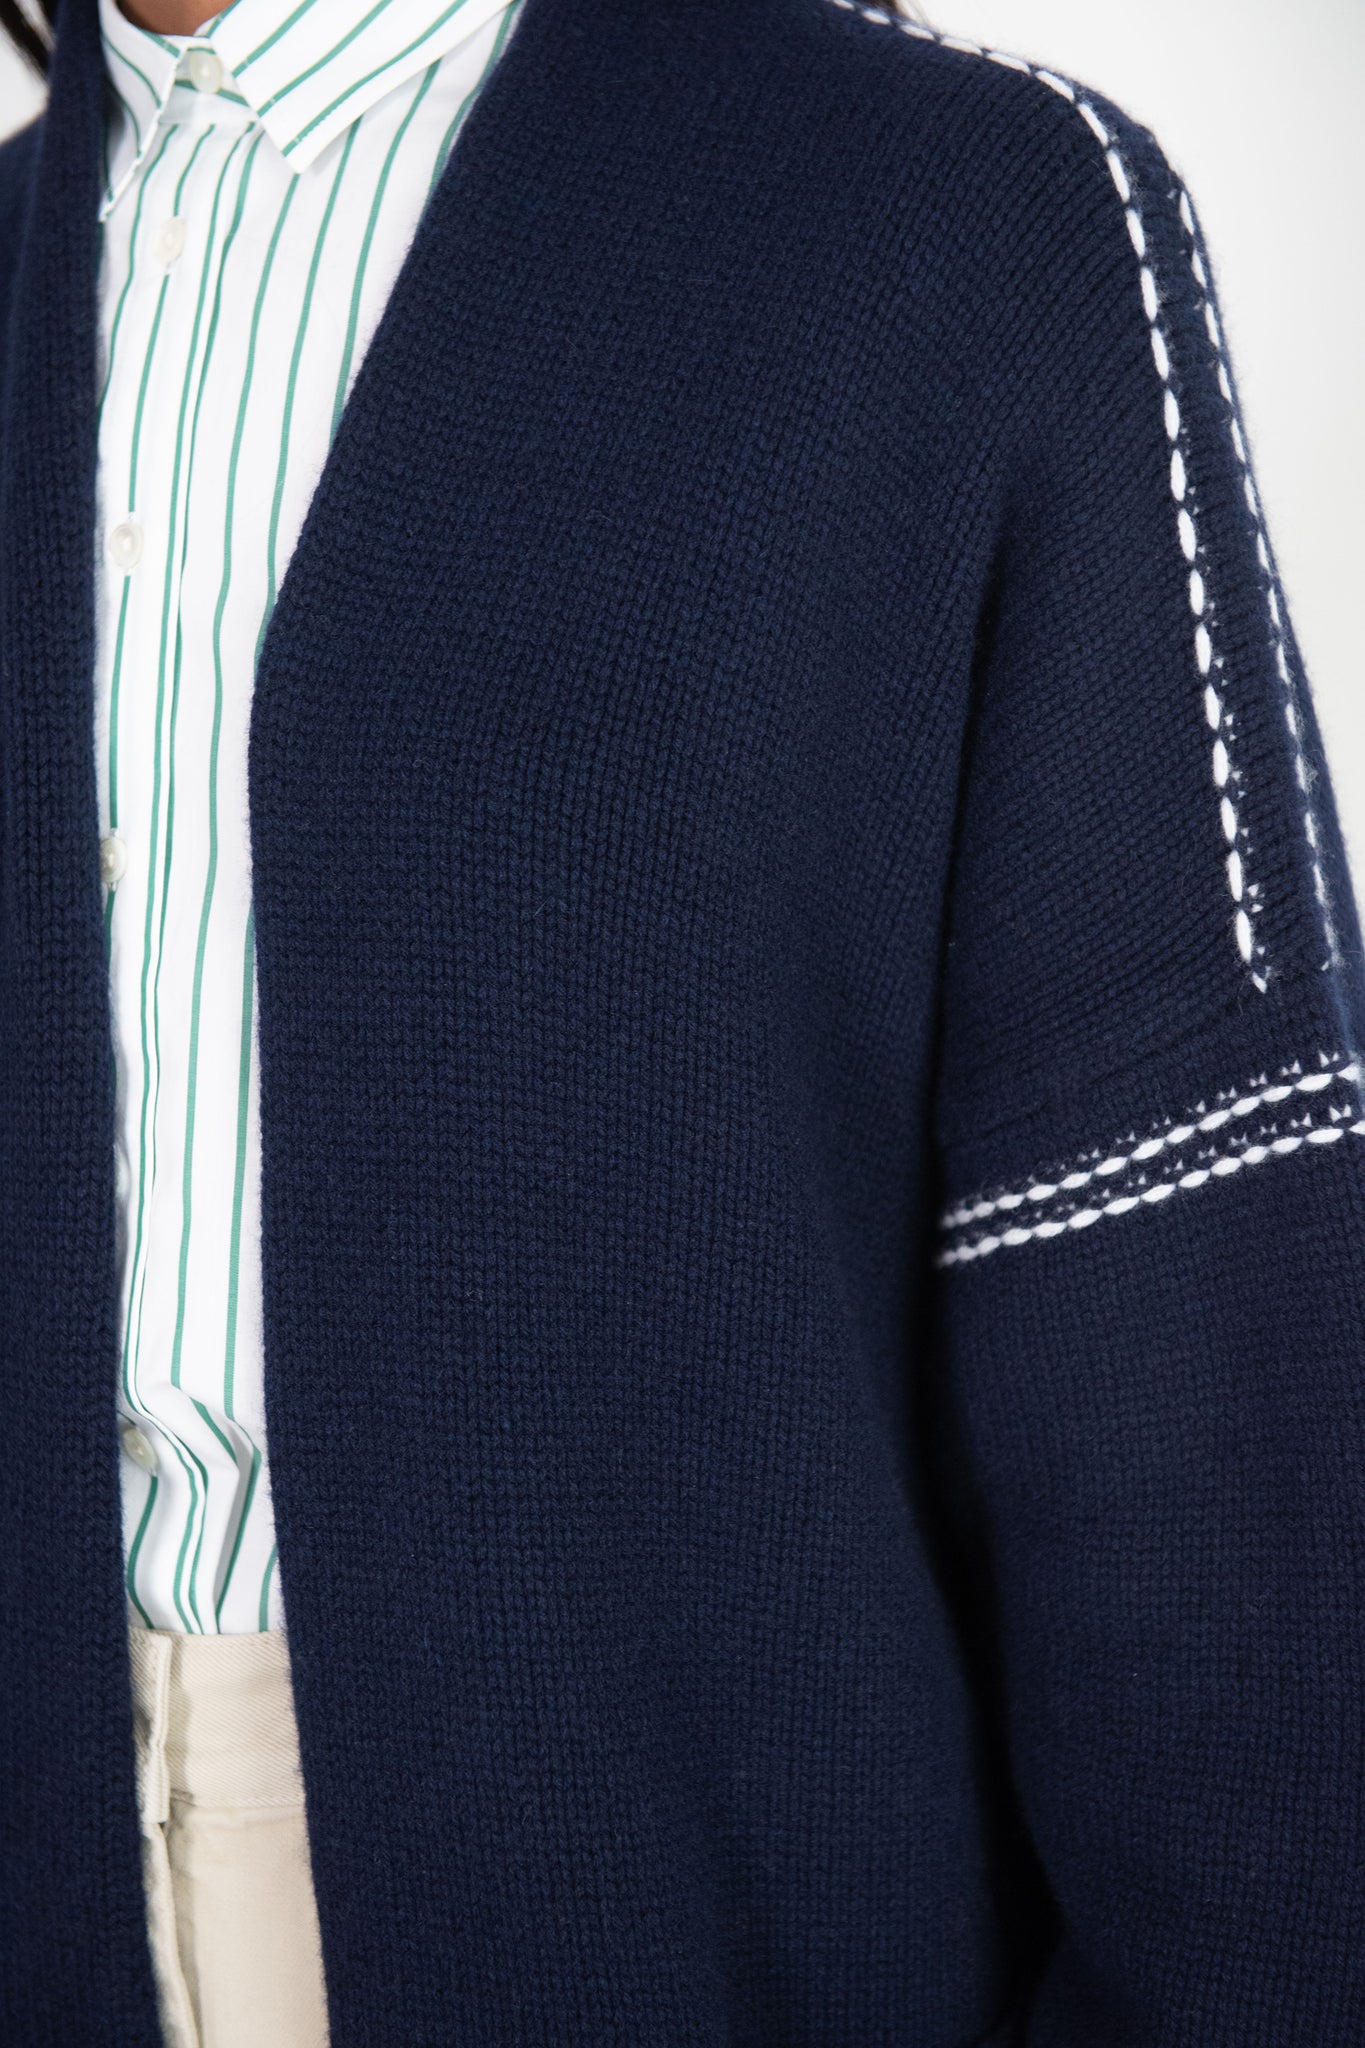 BEGG X CO - Beach Comber Cardigan, Navy and Frost Stripe